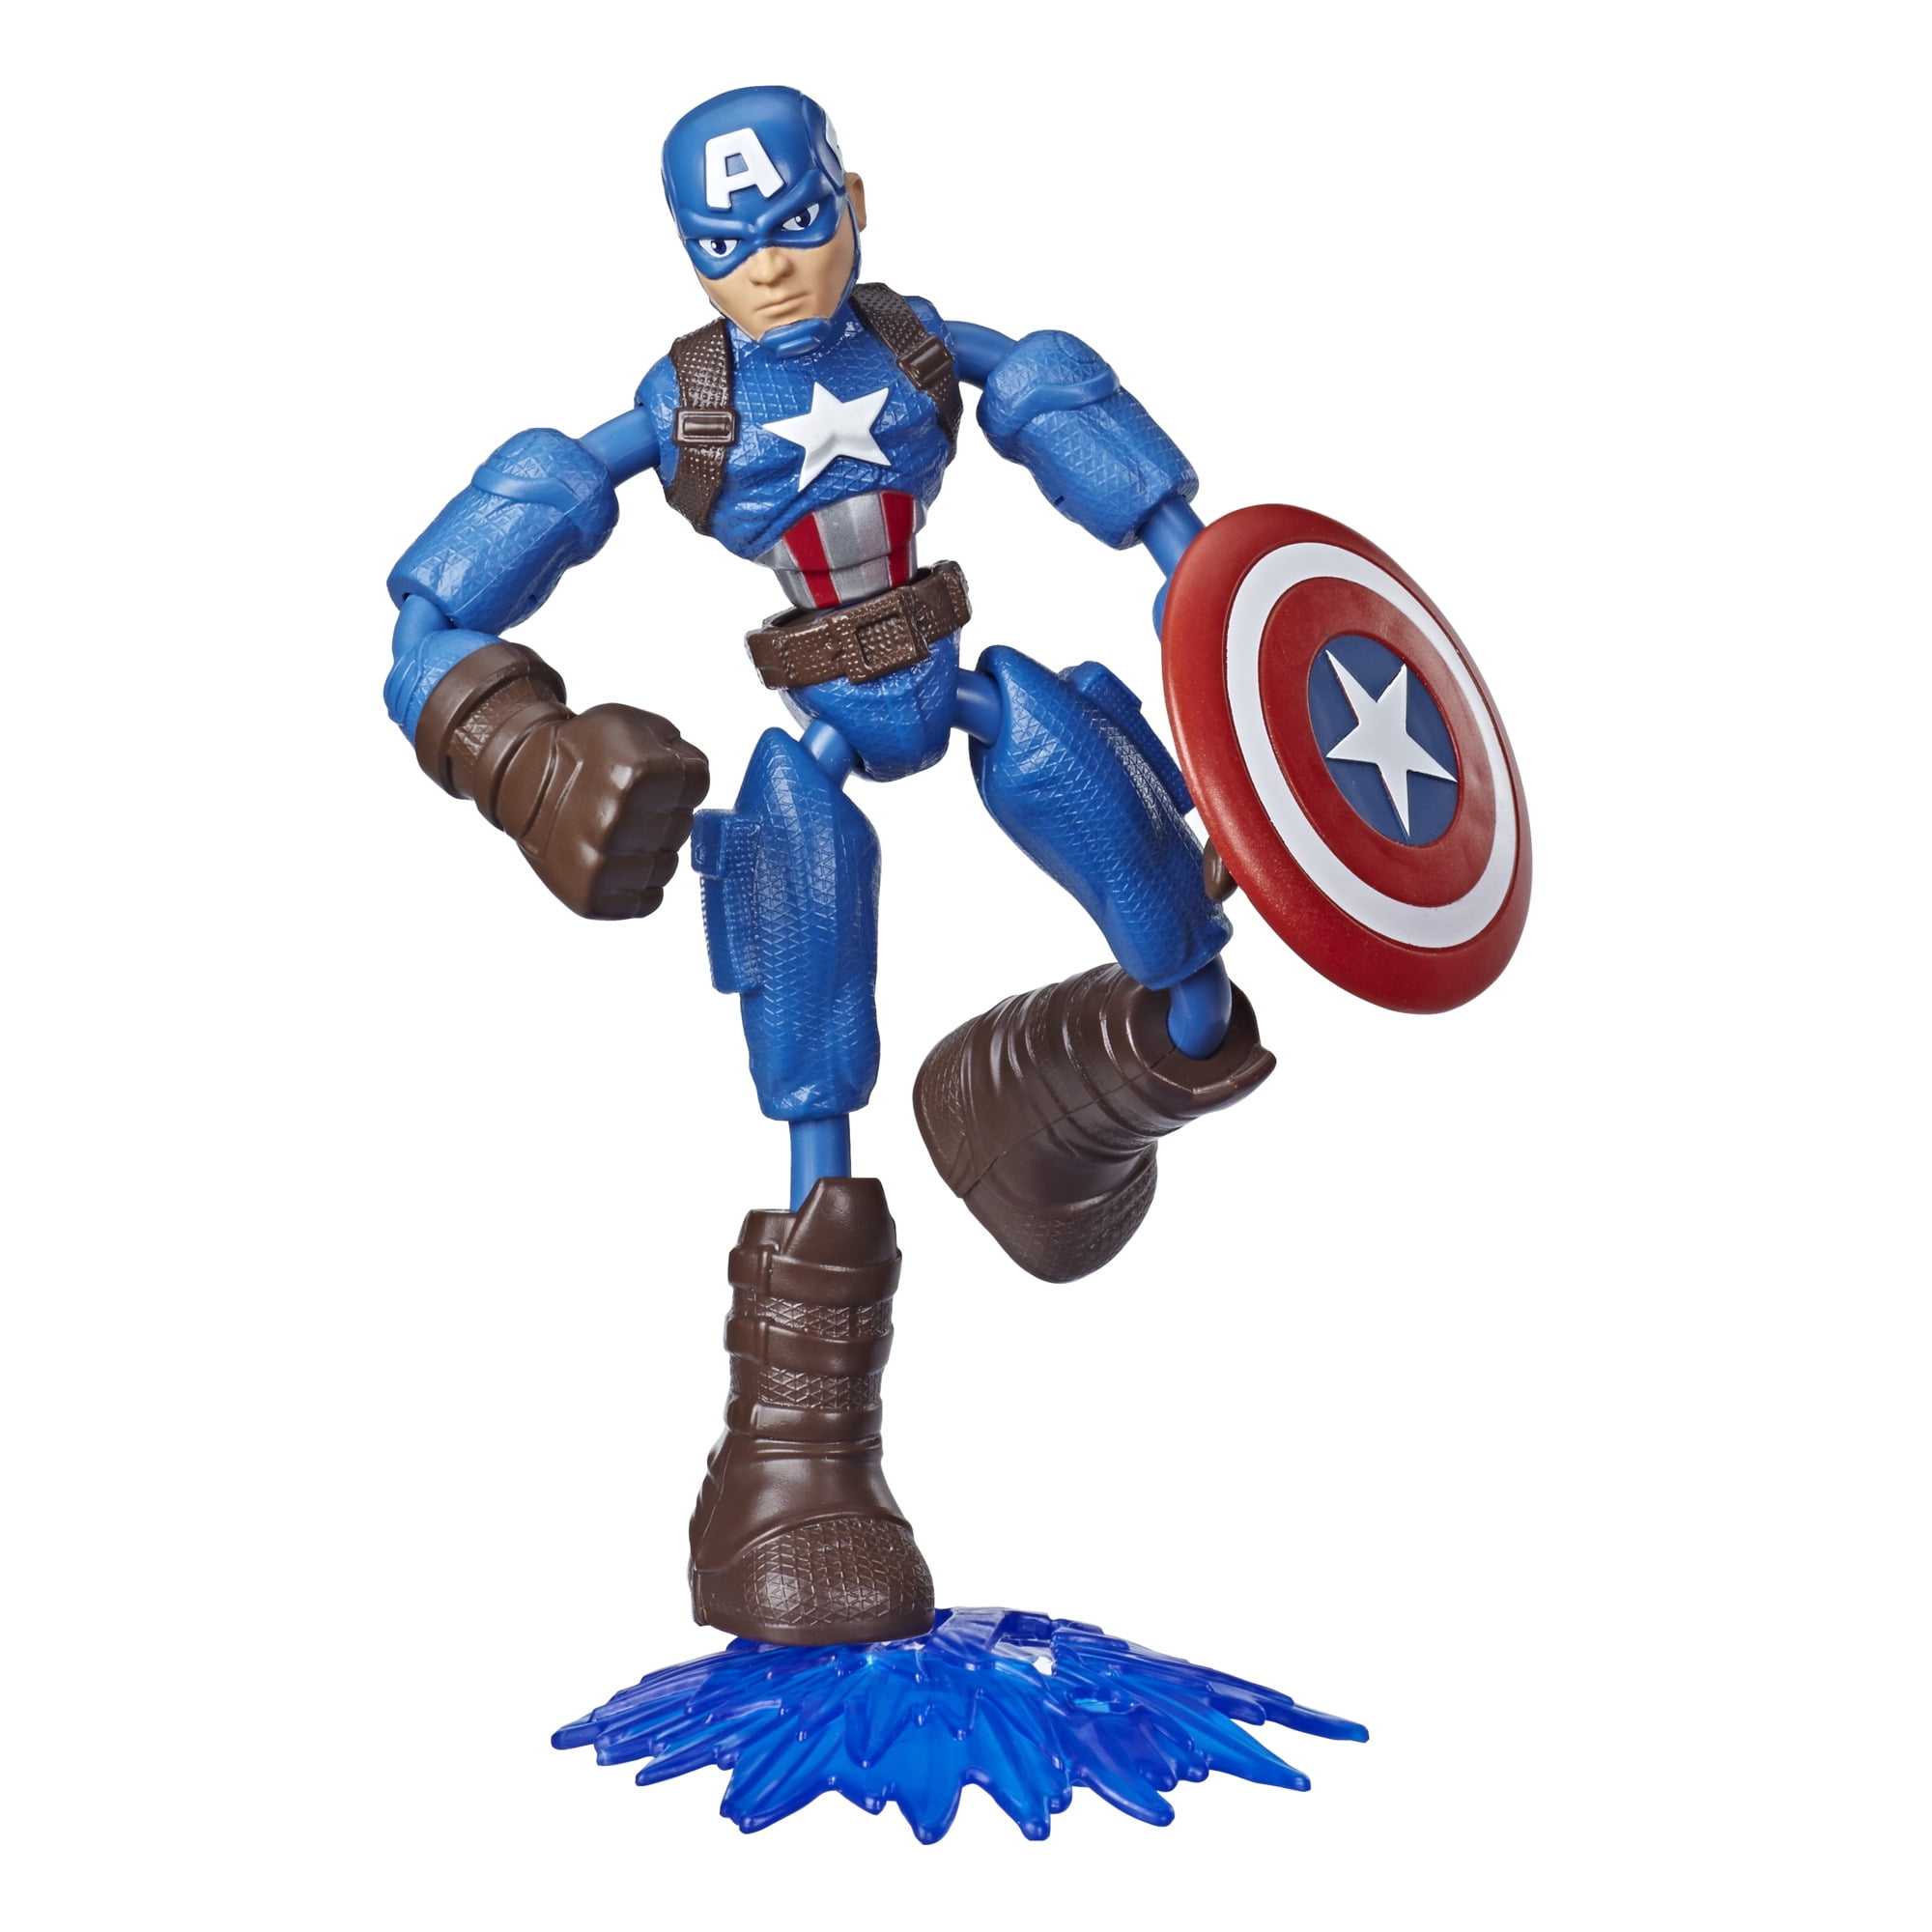 Marvel Super Hero Mashers Captain America Figure 6 inches New Outer Wear Box 